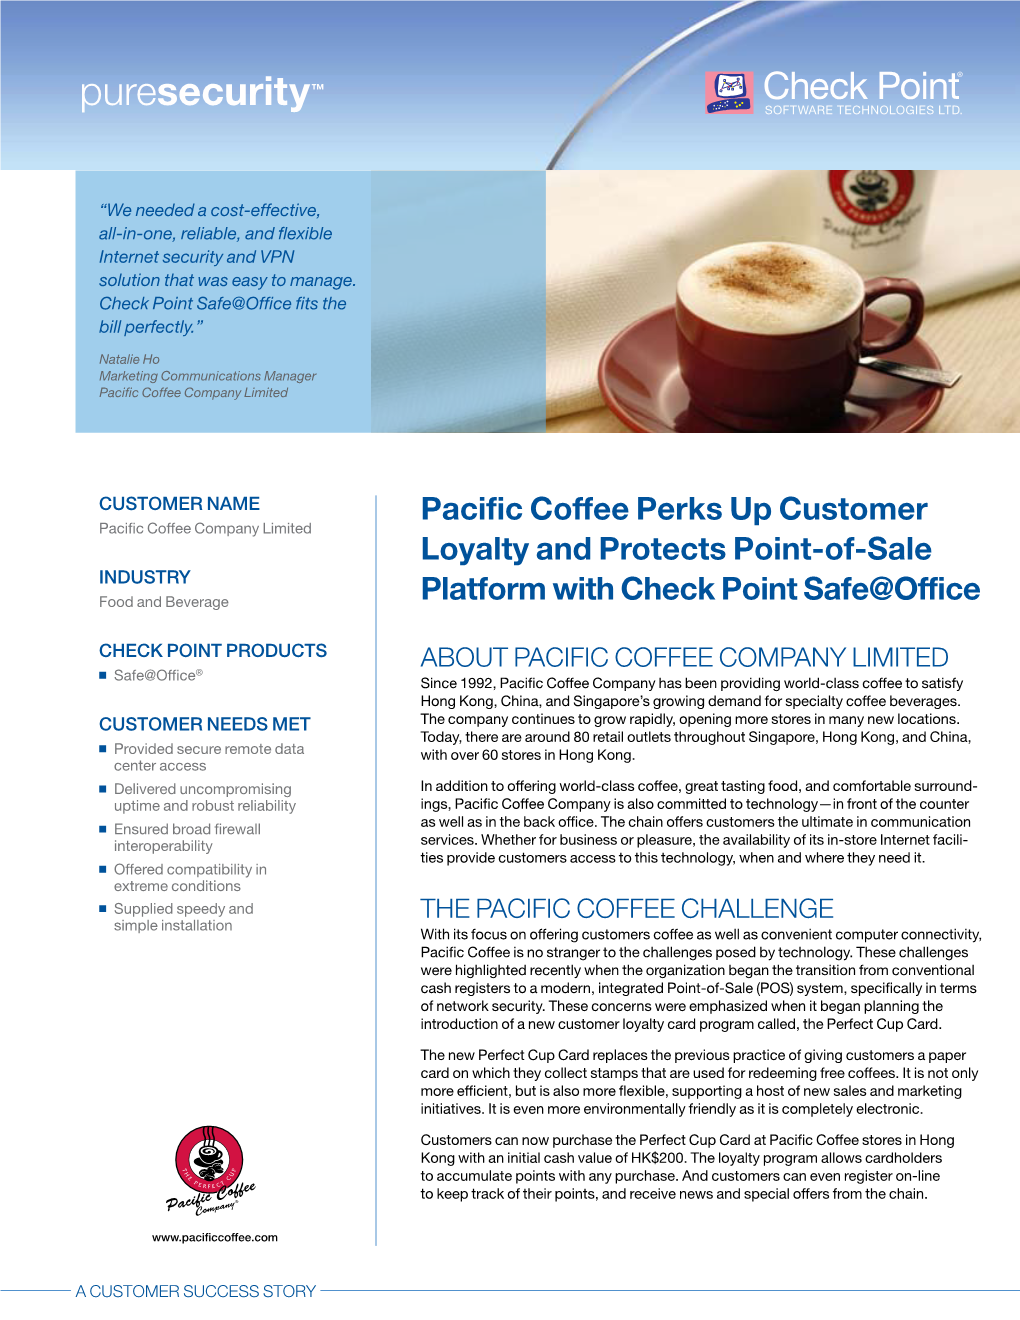 Pacific Coffee Perks up Customer Loyalty and Protects Point-Of-Sale Platform with Check Point Safe@Office